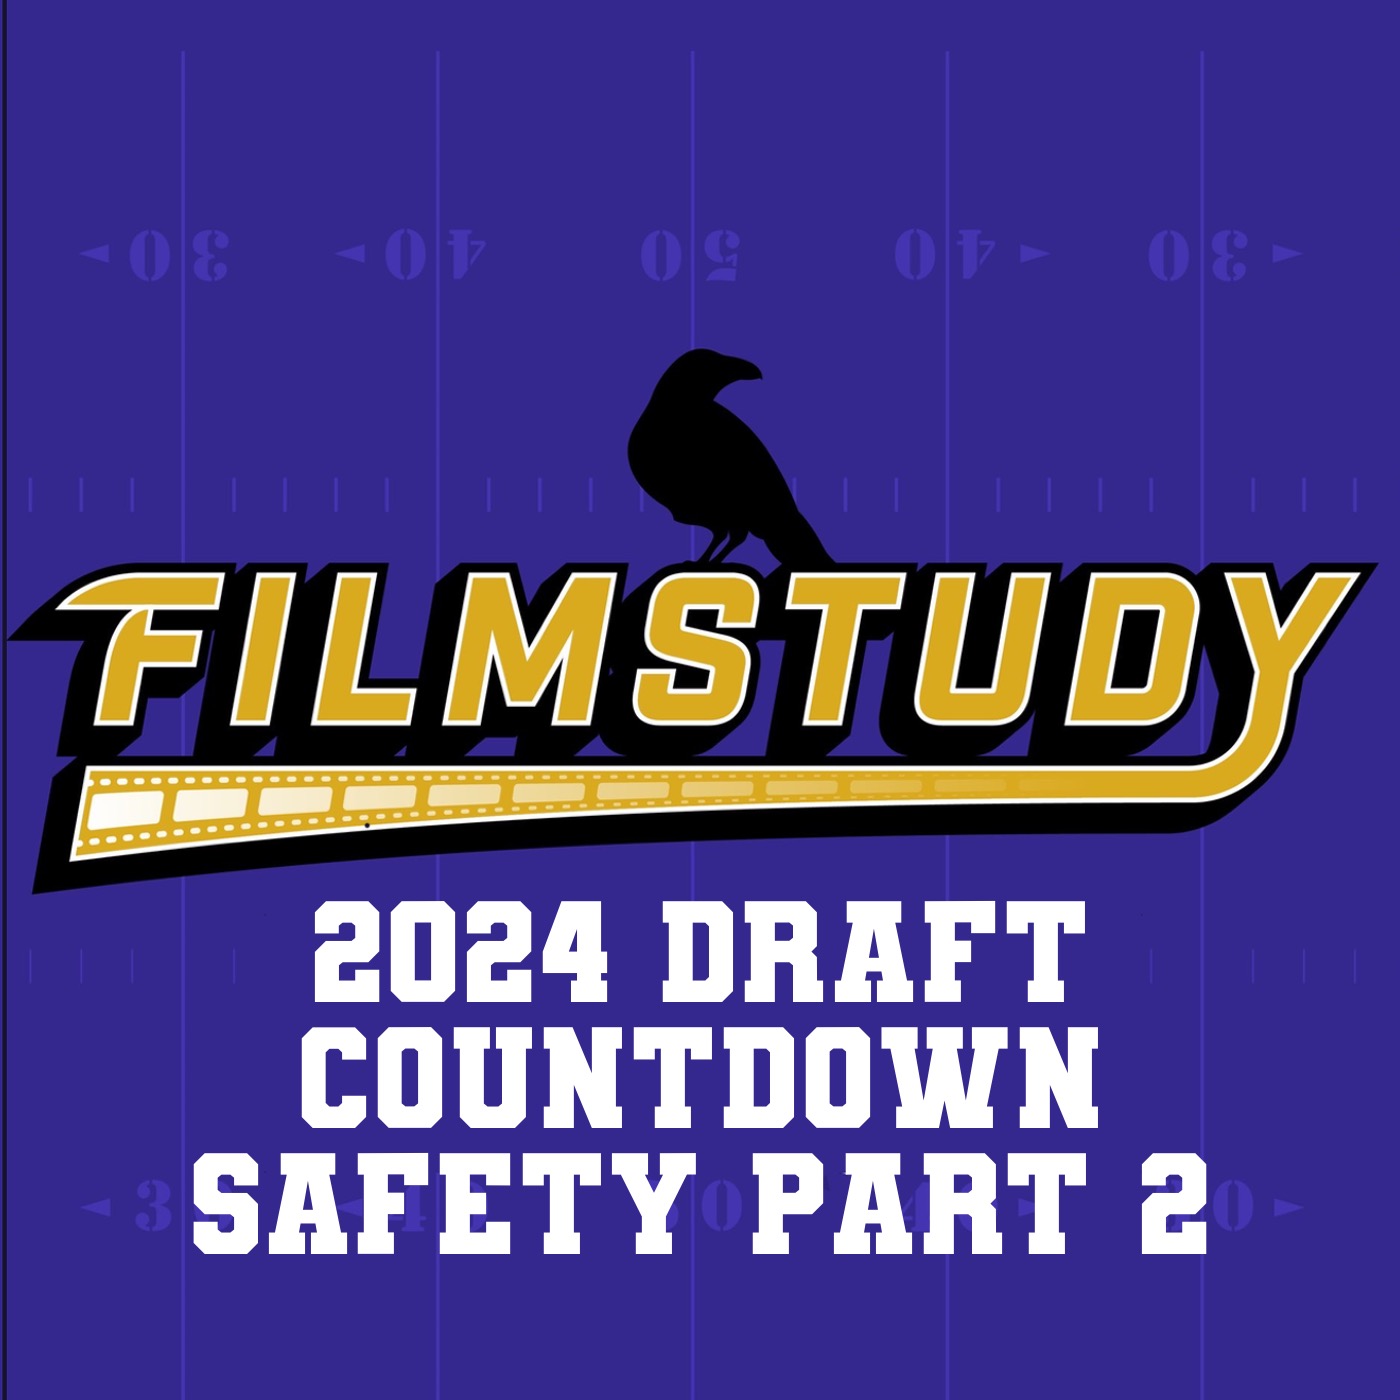 2024 Draft Countdown Safety Part 2